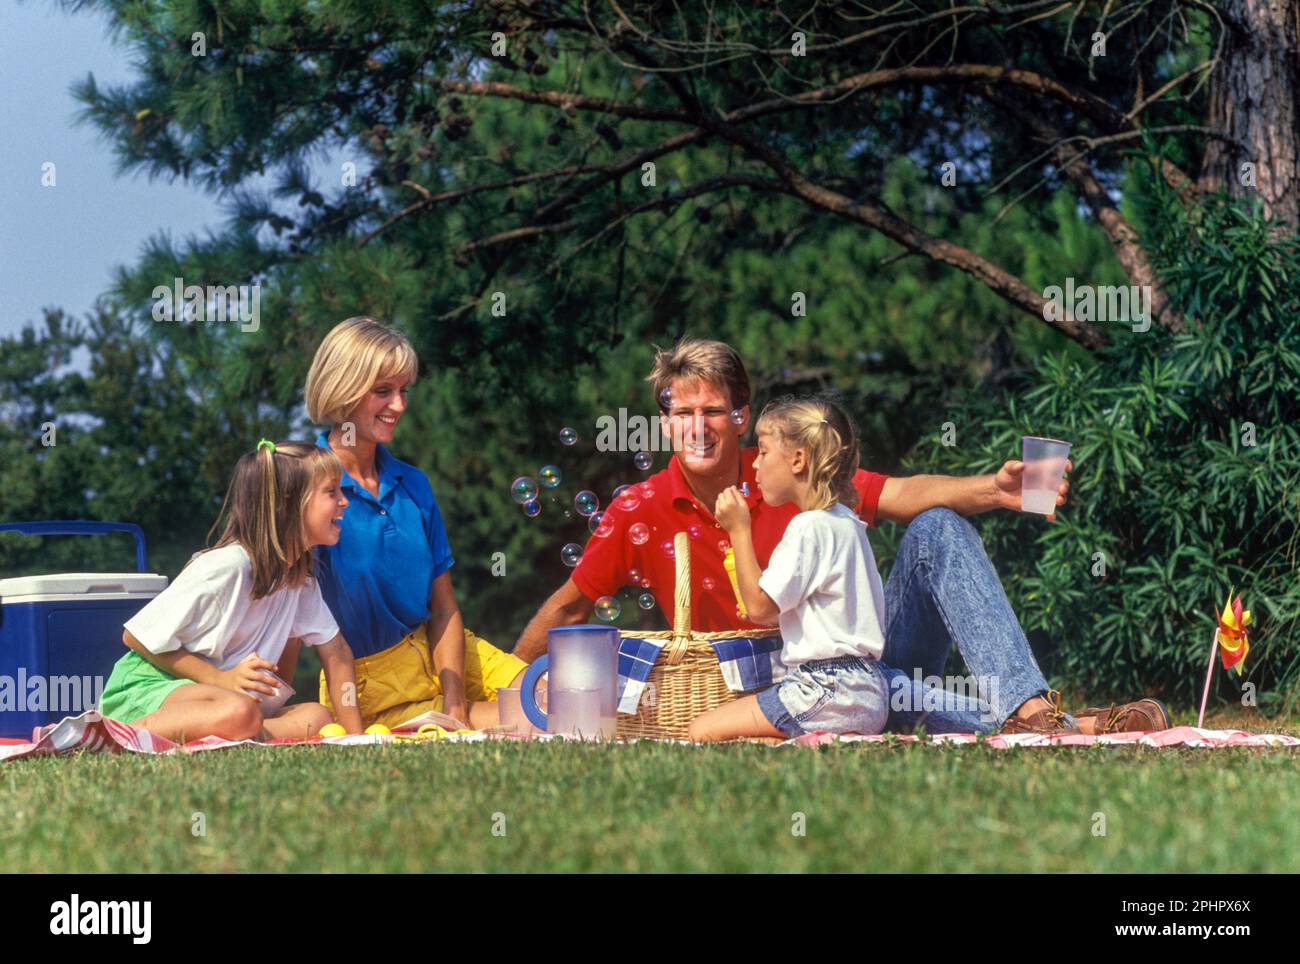 1990 HISTORICAL FAMILY SITTING TOGETHER ON BLANKET OUTSIDE ON PICNIC Stock Photo